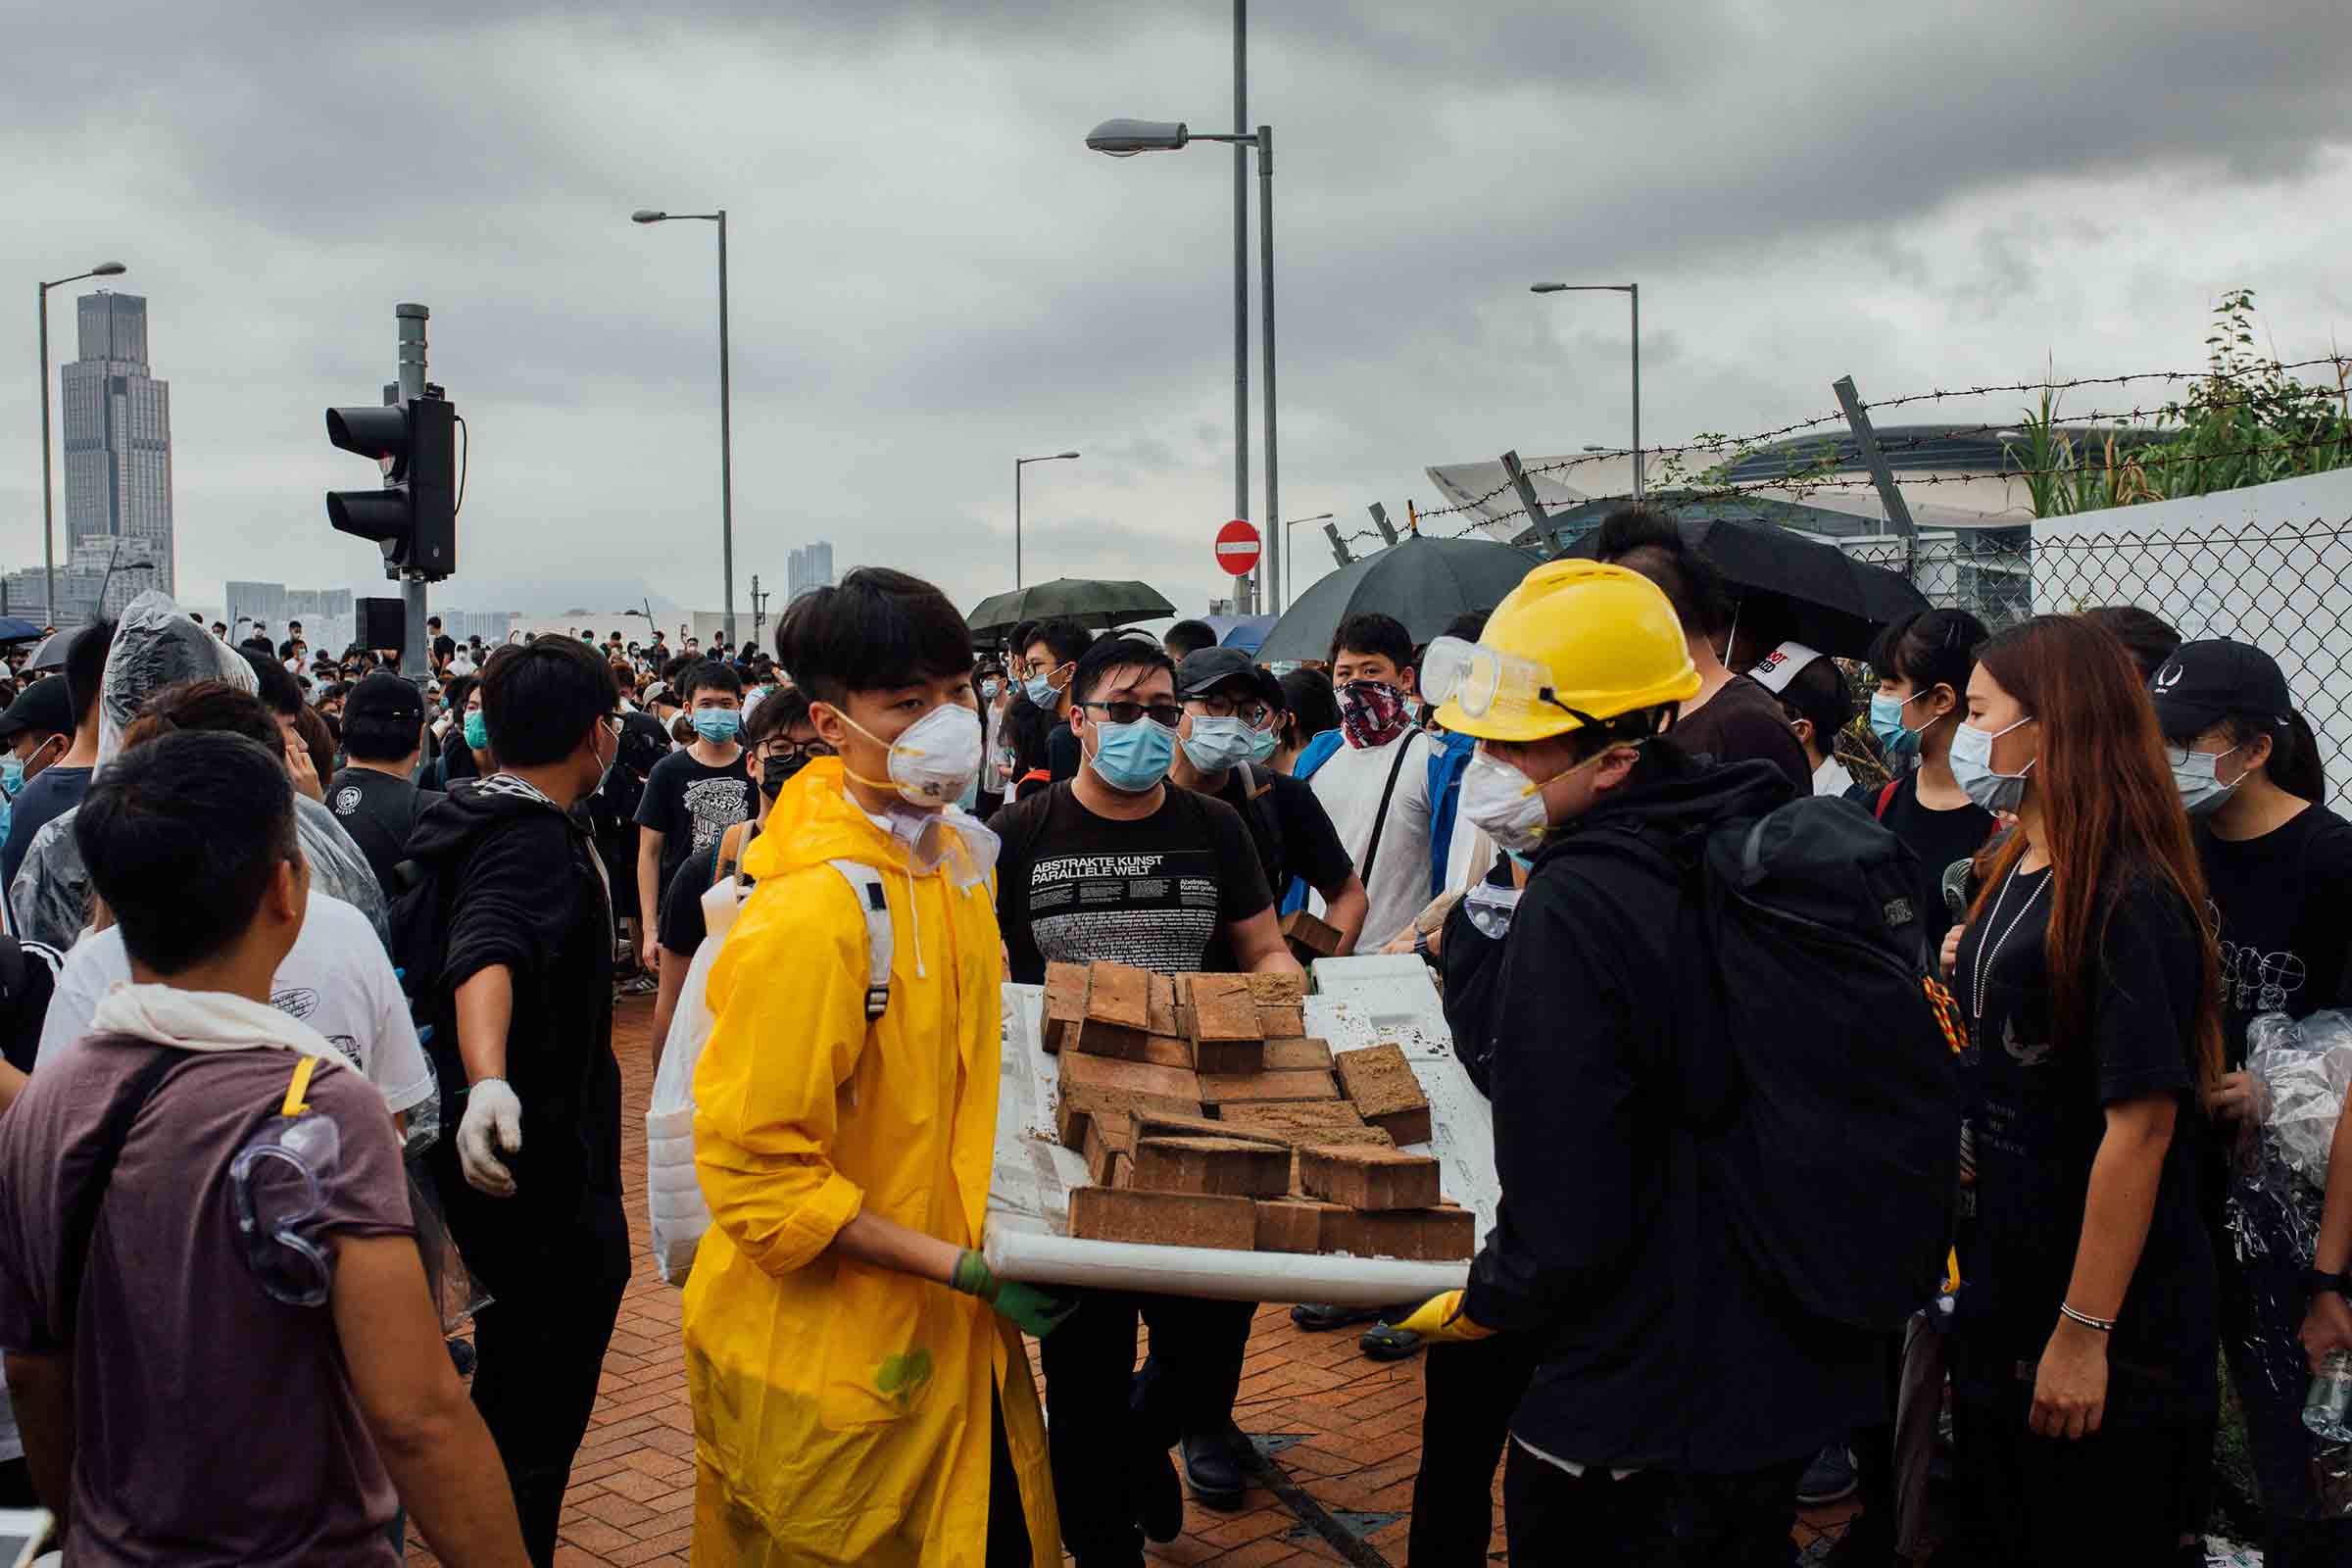 Demonstrators transport bricks at a protest site on June 12. Police said some protesters threw bricks at officers. (Lucien Lung—Riva Press/Redux)